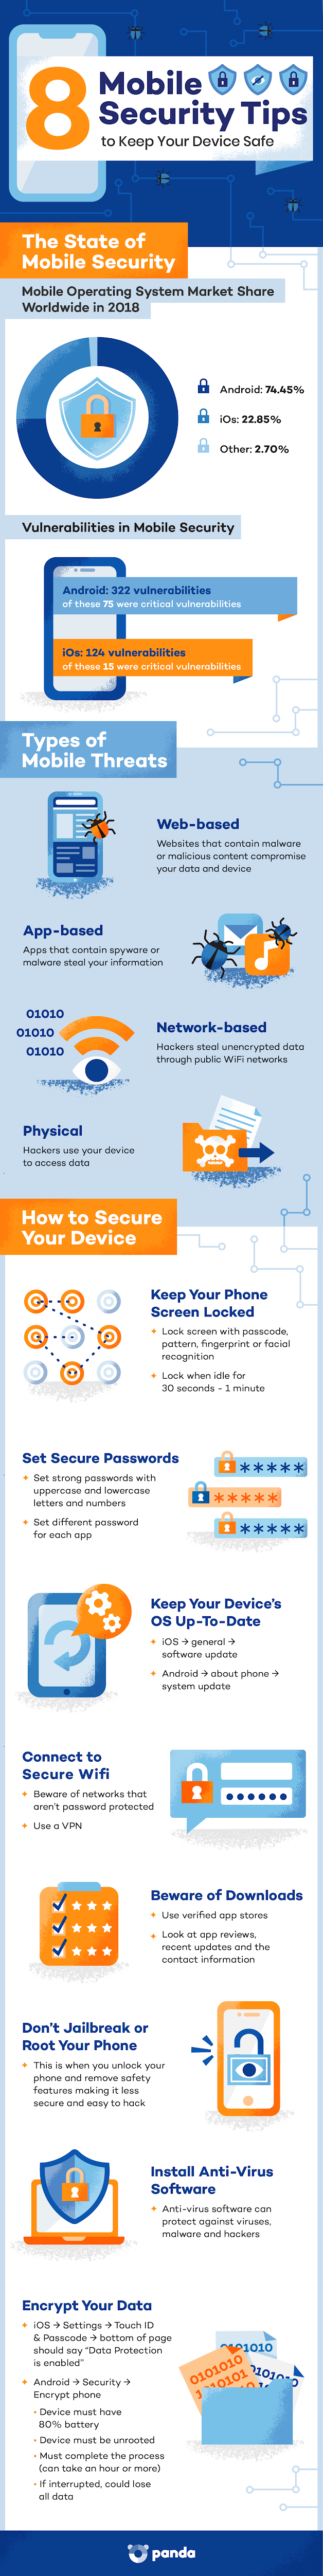 8 Mobile Security Tips to Keep Your Device Safe #infographic